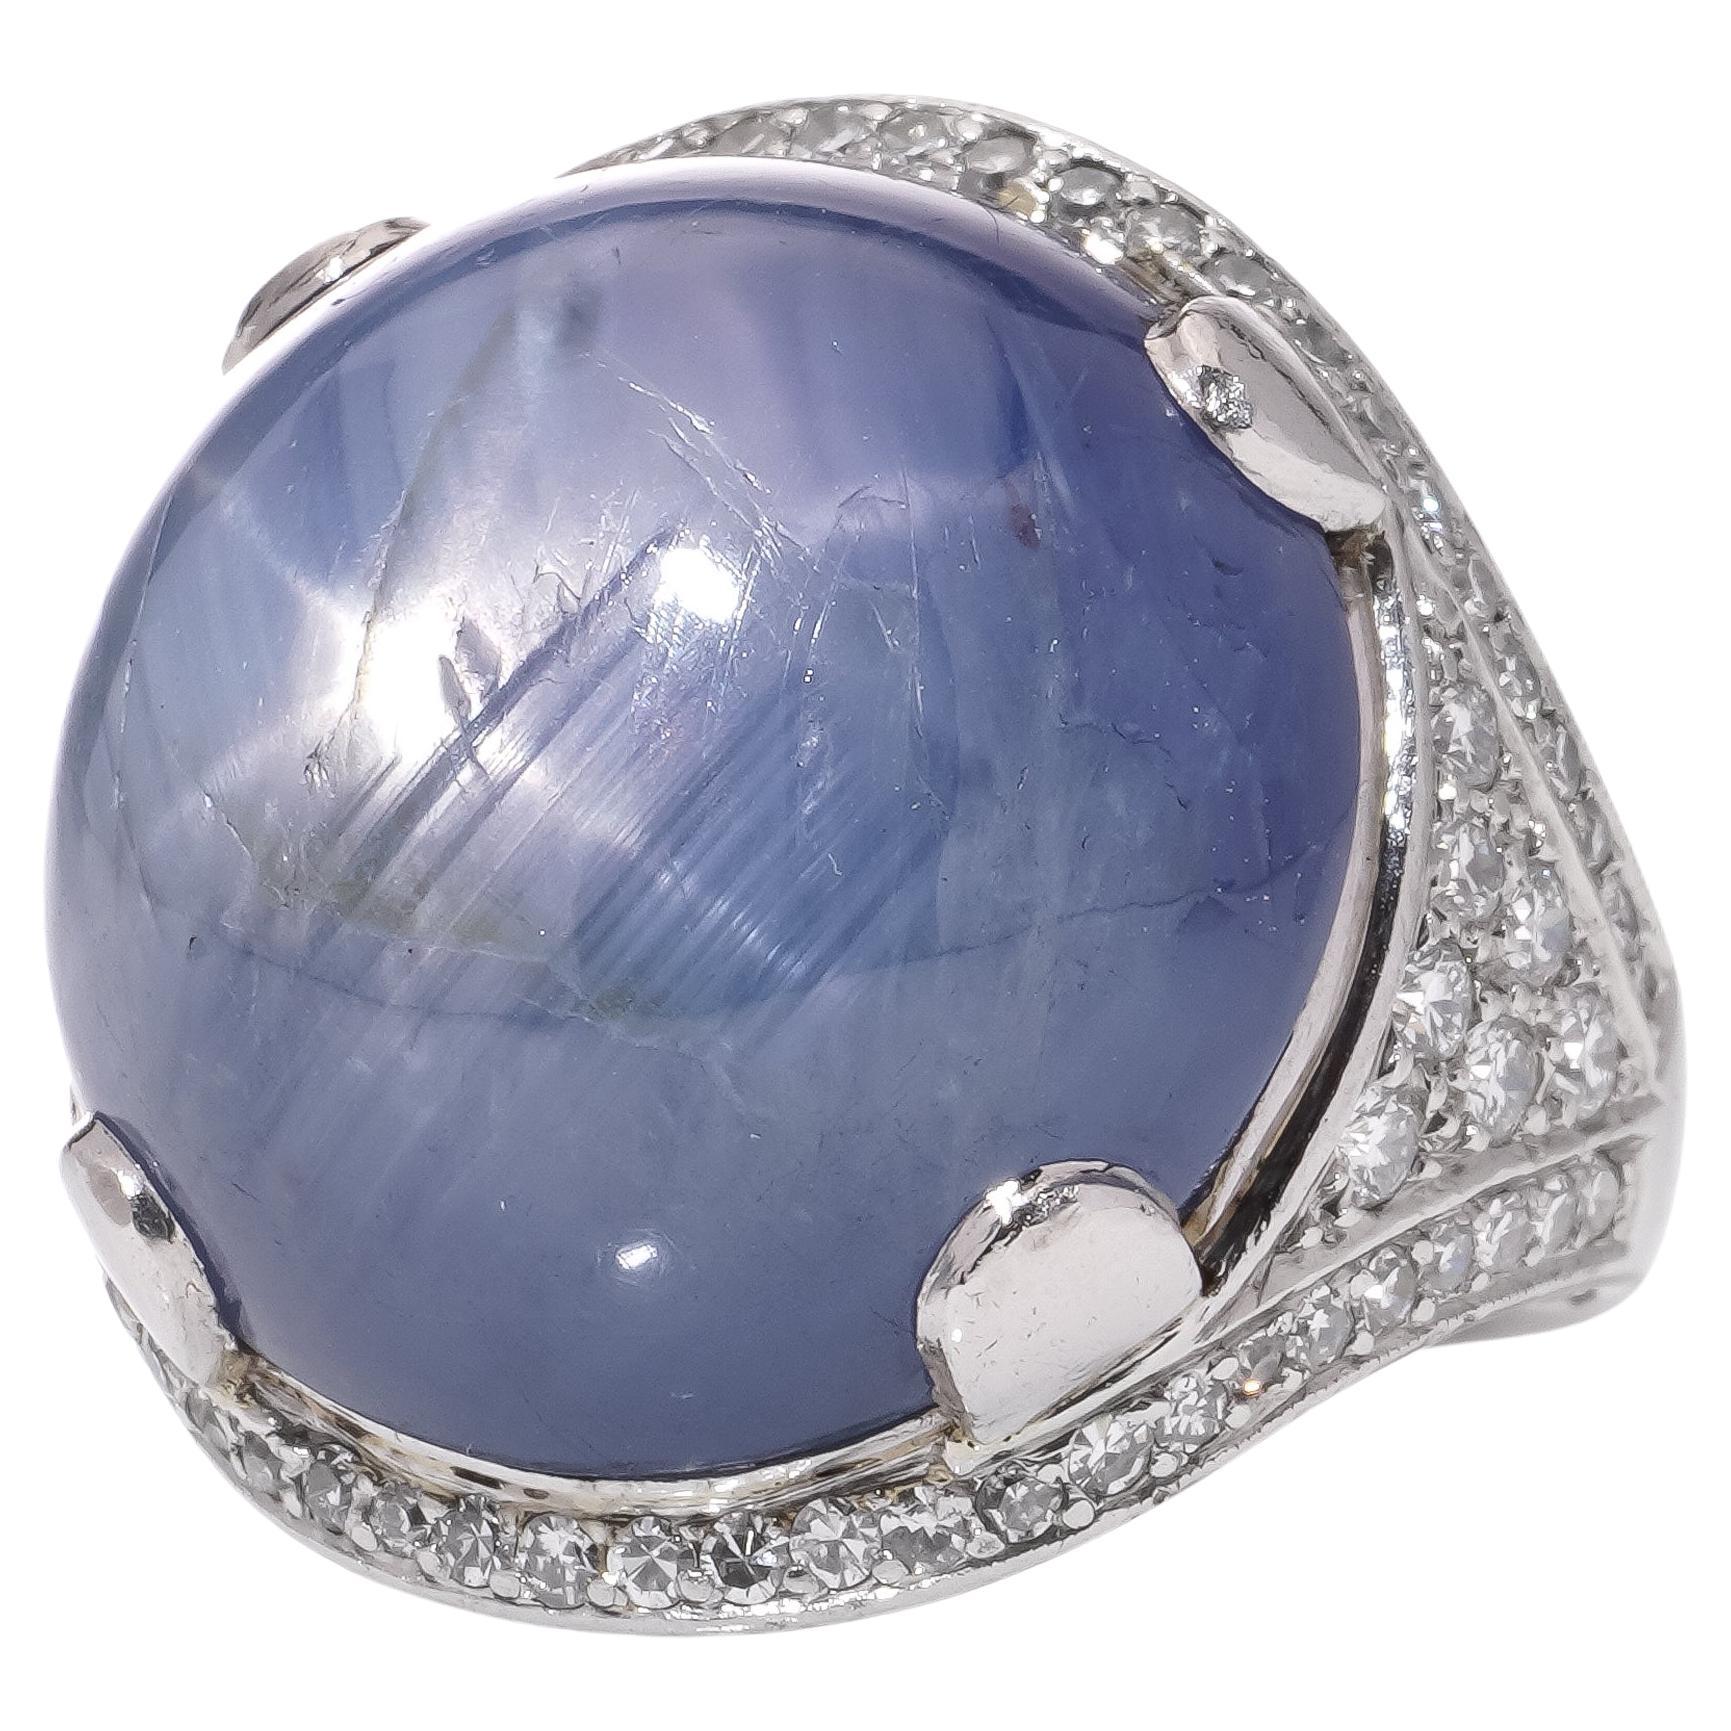 Platinum ladies' dome ring with 46 cts. of round natural cabochon sapphire For Sale